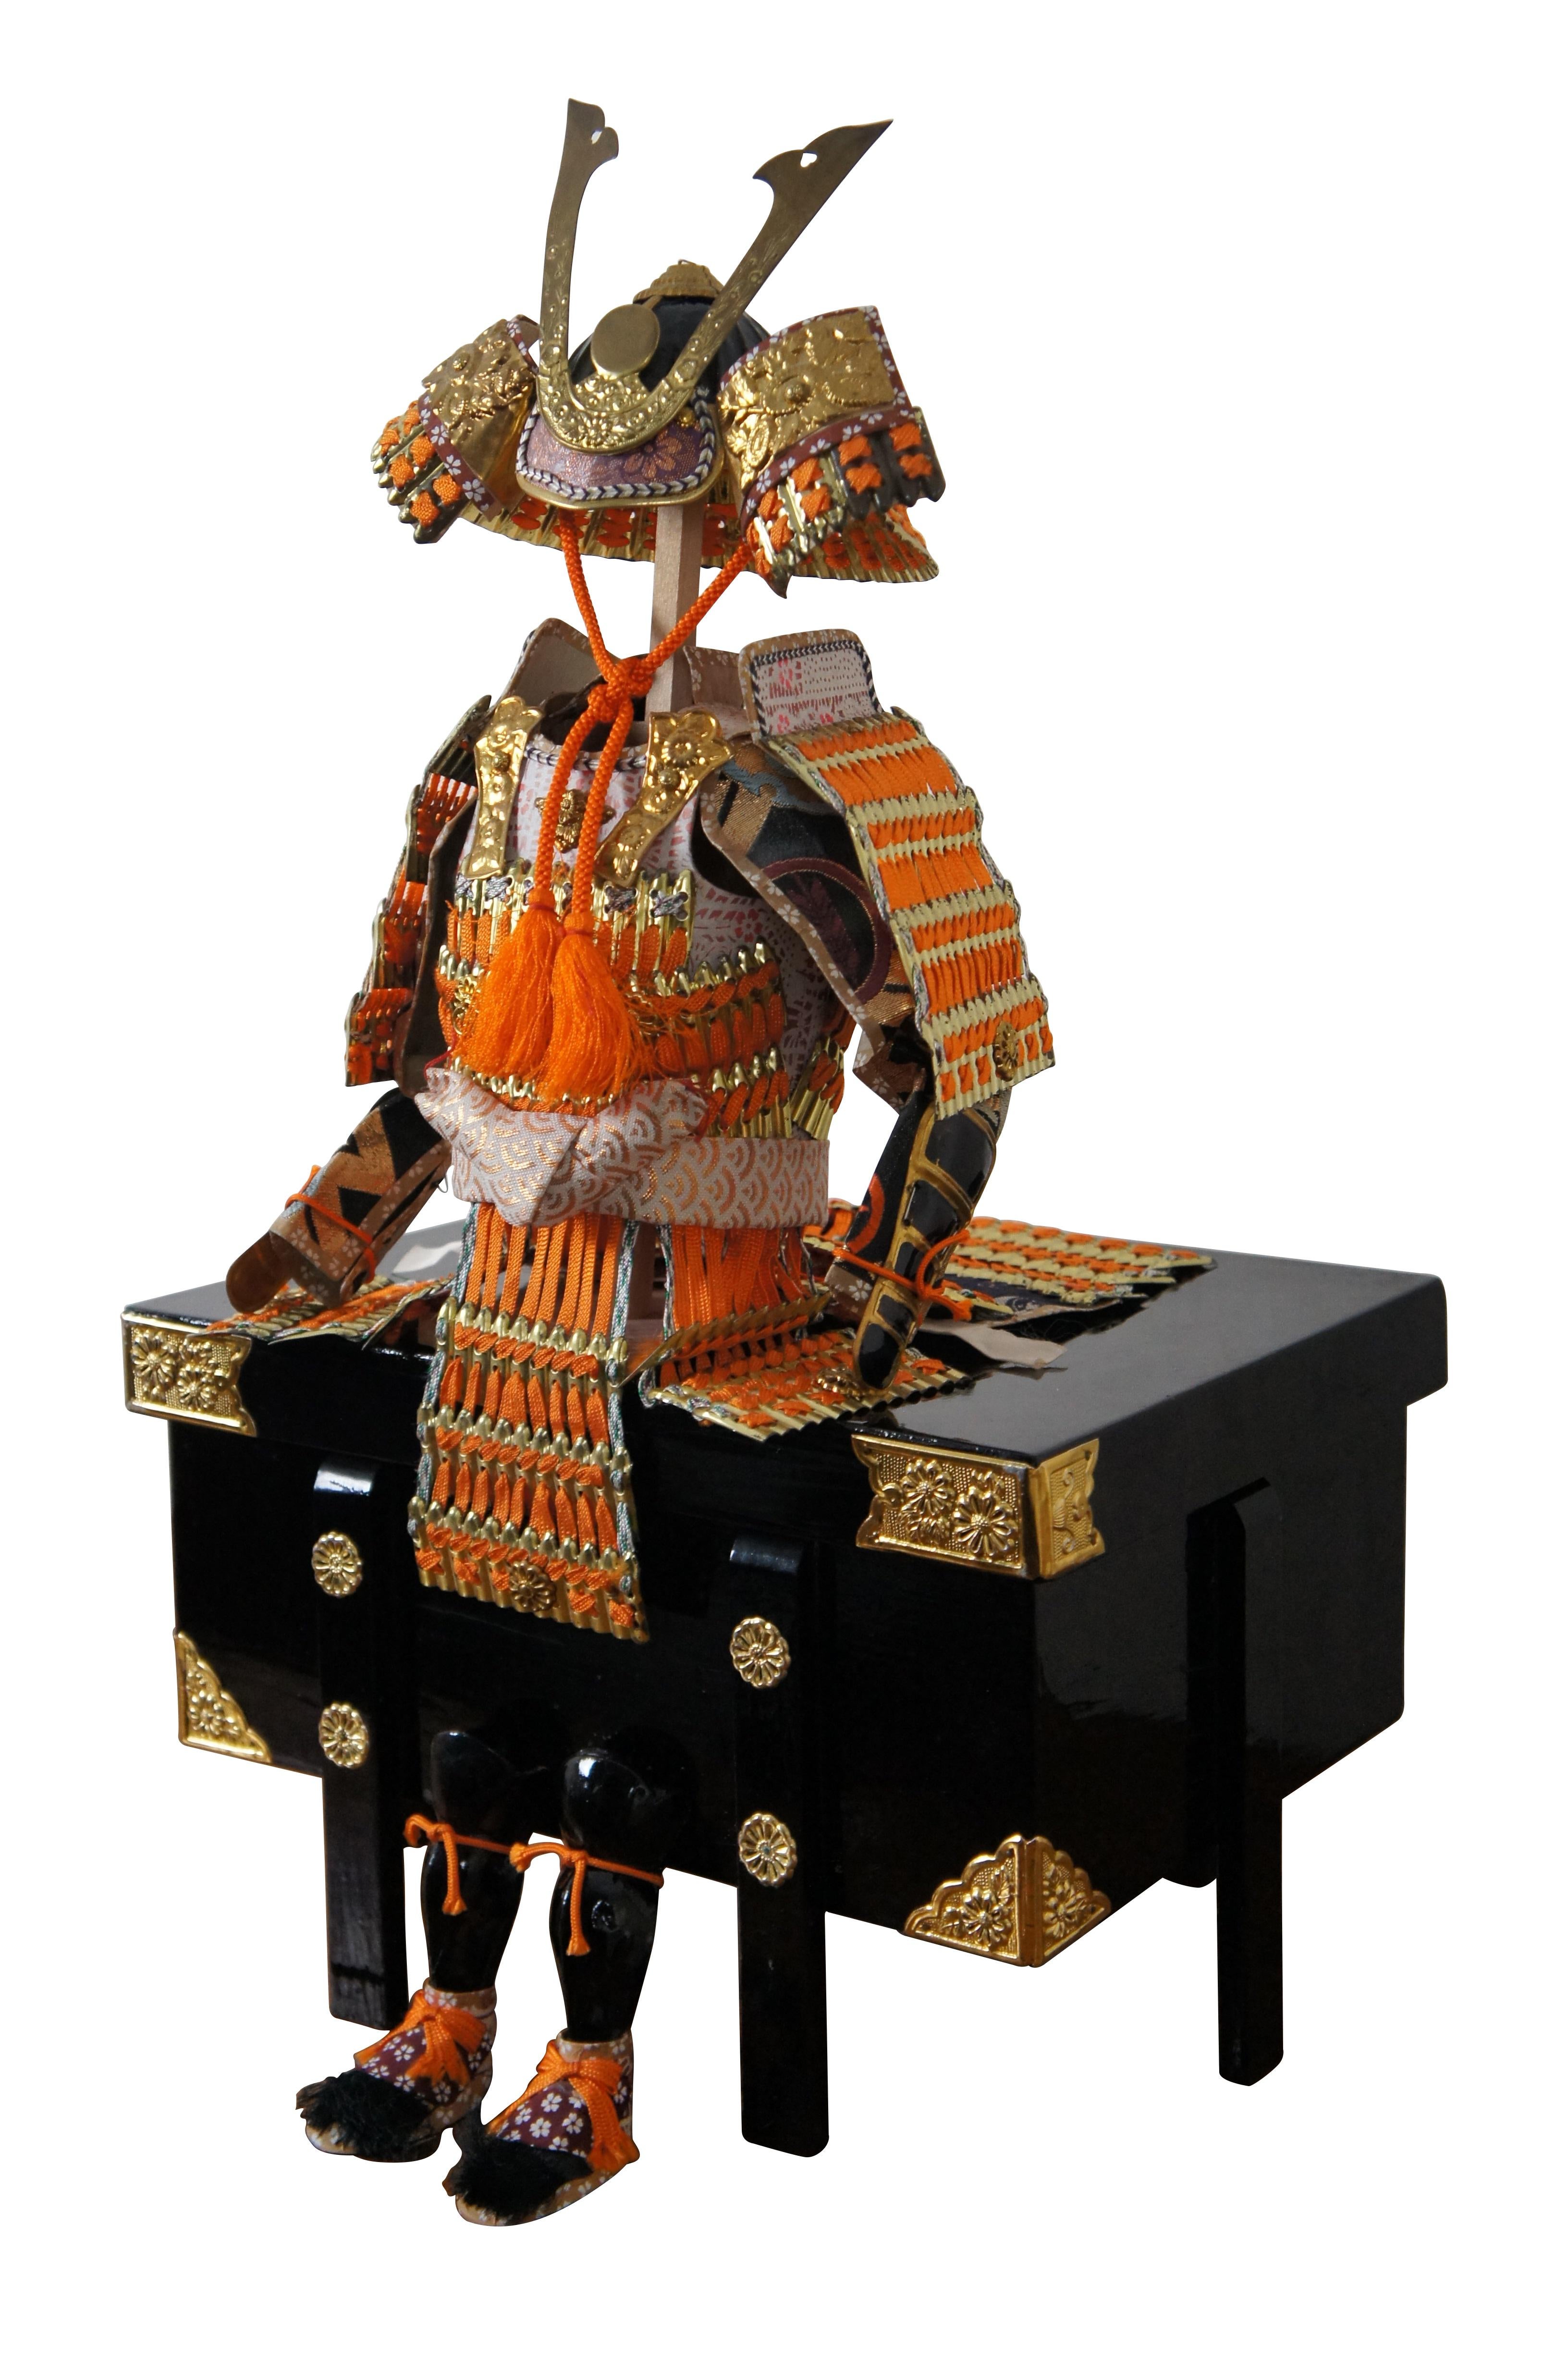 Vintage set of Japanese samurai doll armor in orange and gold, designed to perch on the edge of the black lacquer campaign style storage box with floral gilt metal corner pieces and medallions.

Dimensions:
12.5” x 9.25” x 21.5” (Width x Depth x